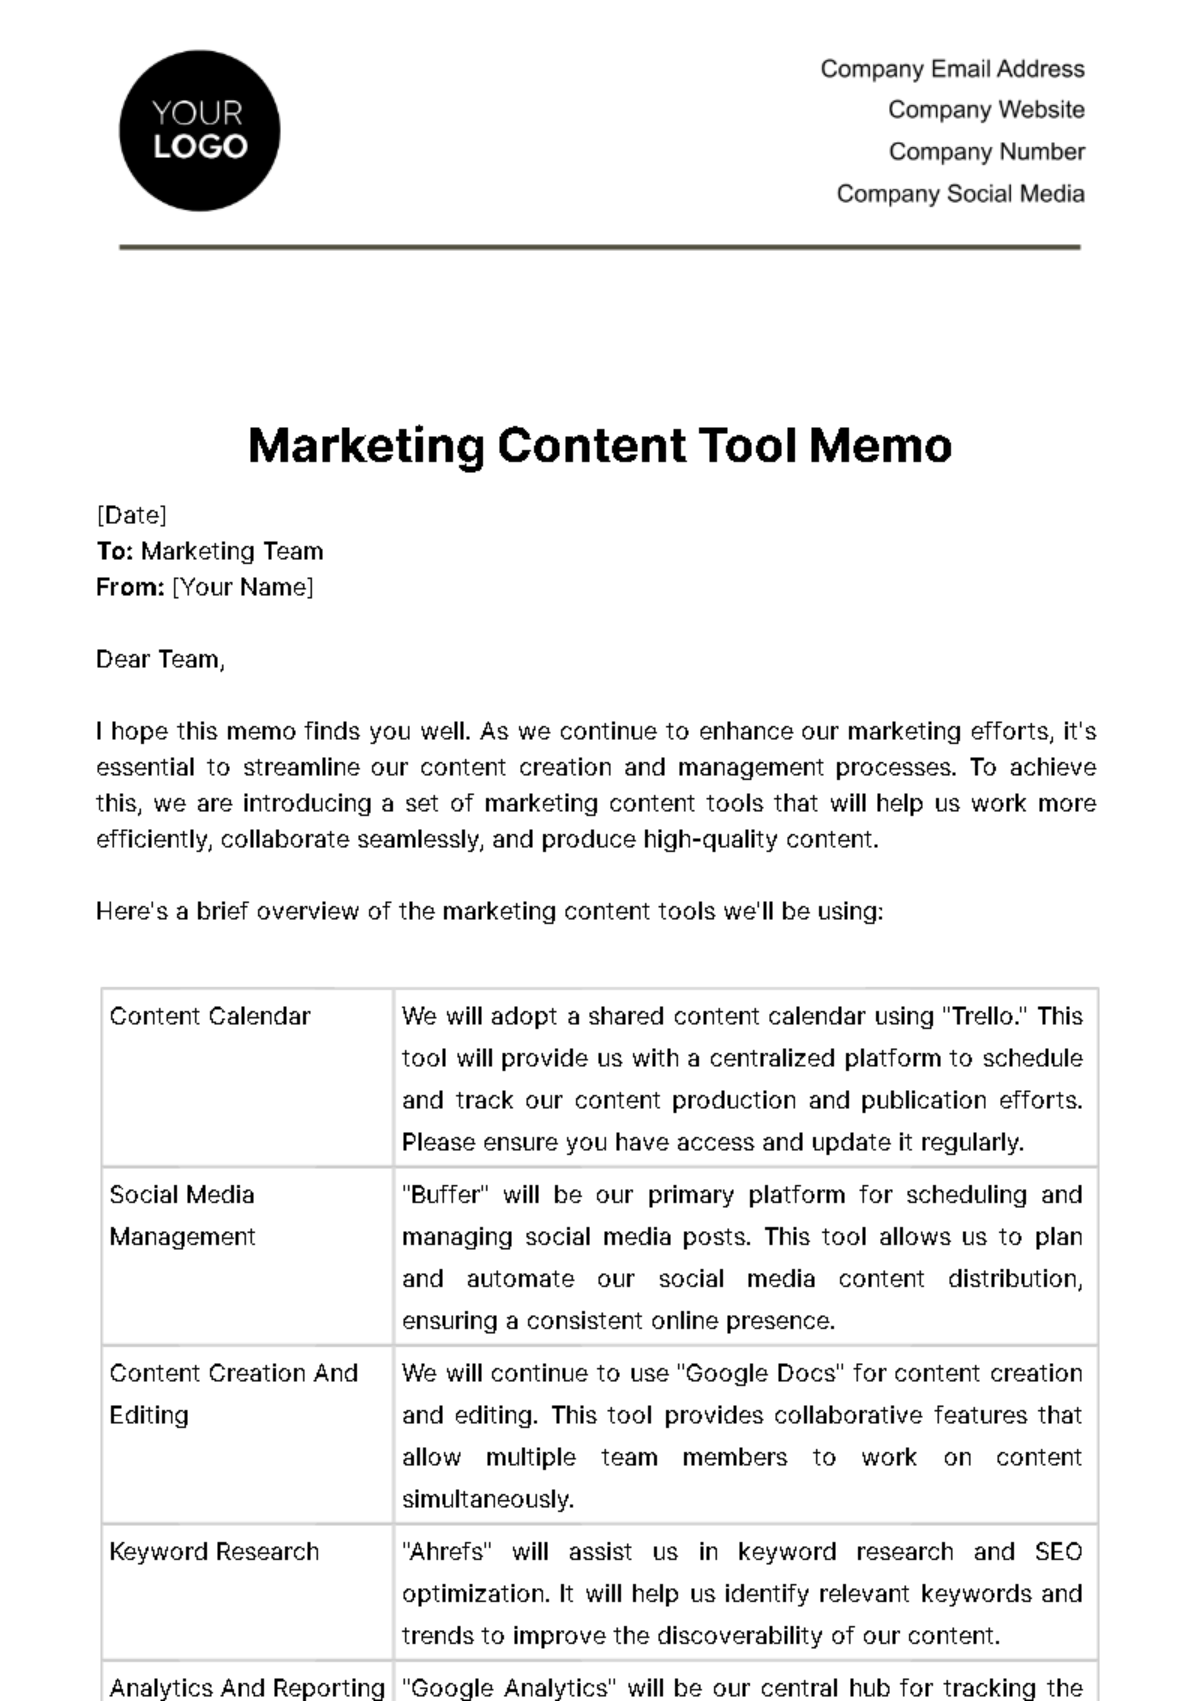 Free Marketing Content Tool Memo Template